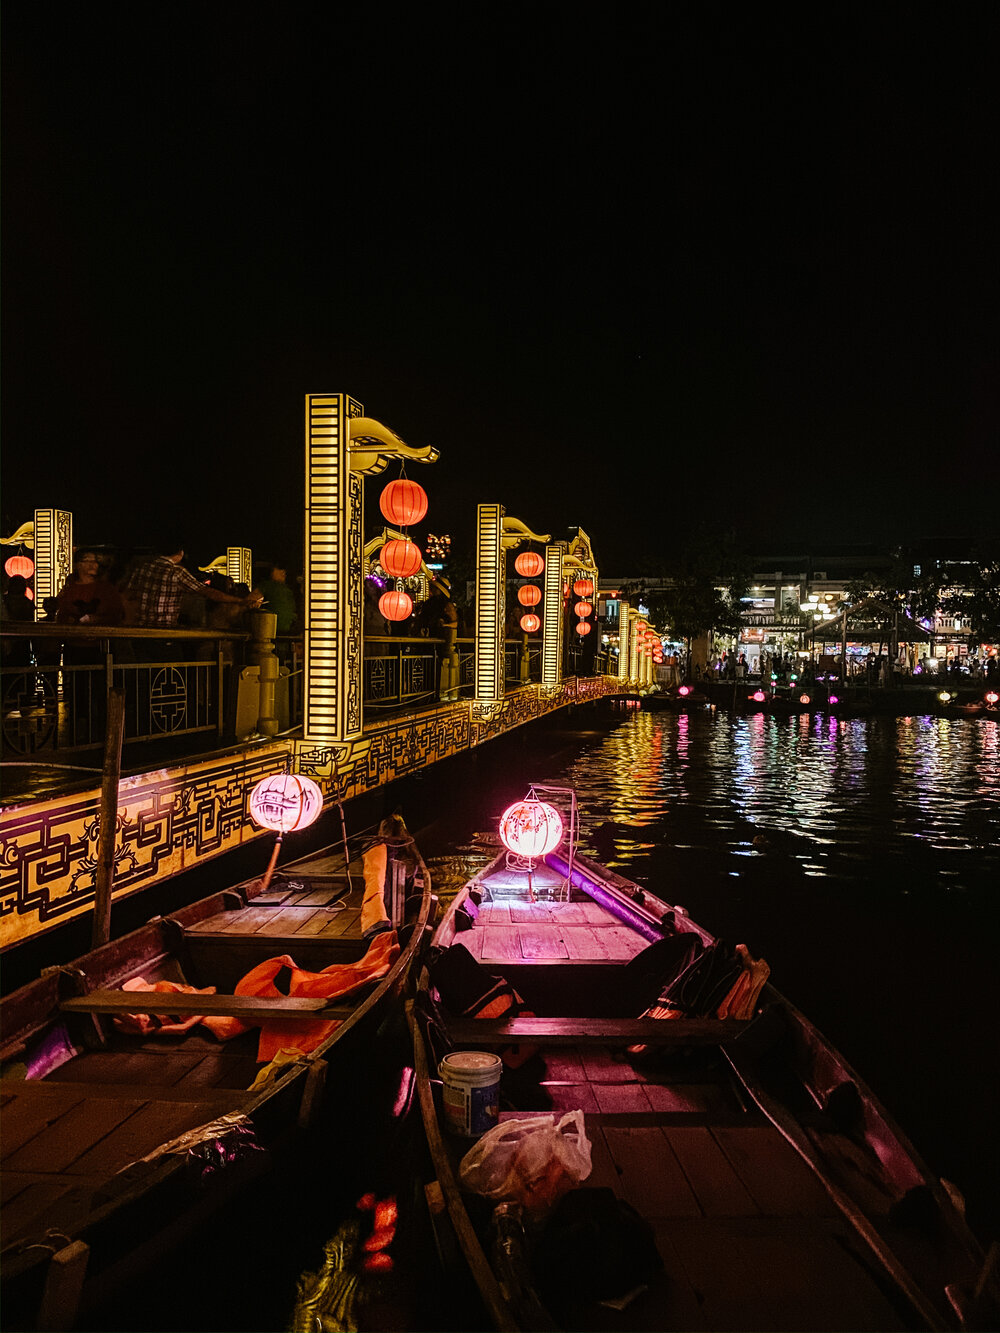  Best places to take Instagram photos in Old City, Hoi An, Vietnam. 